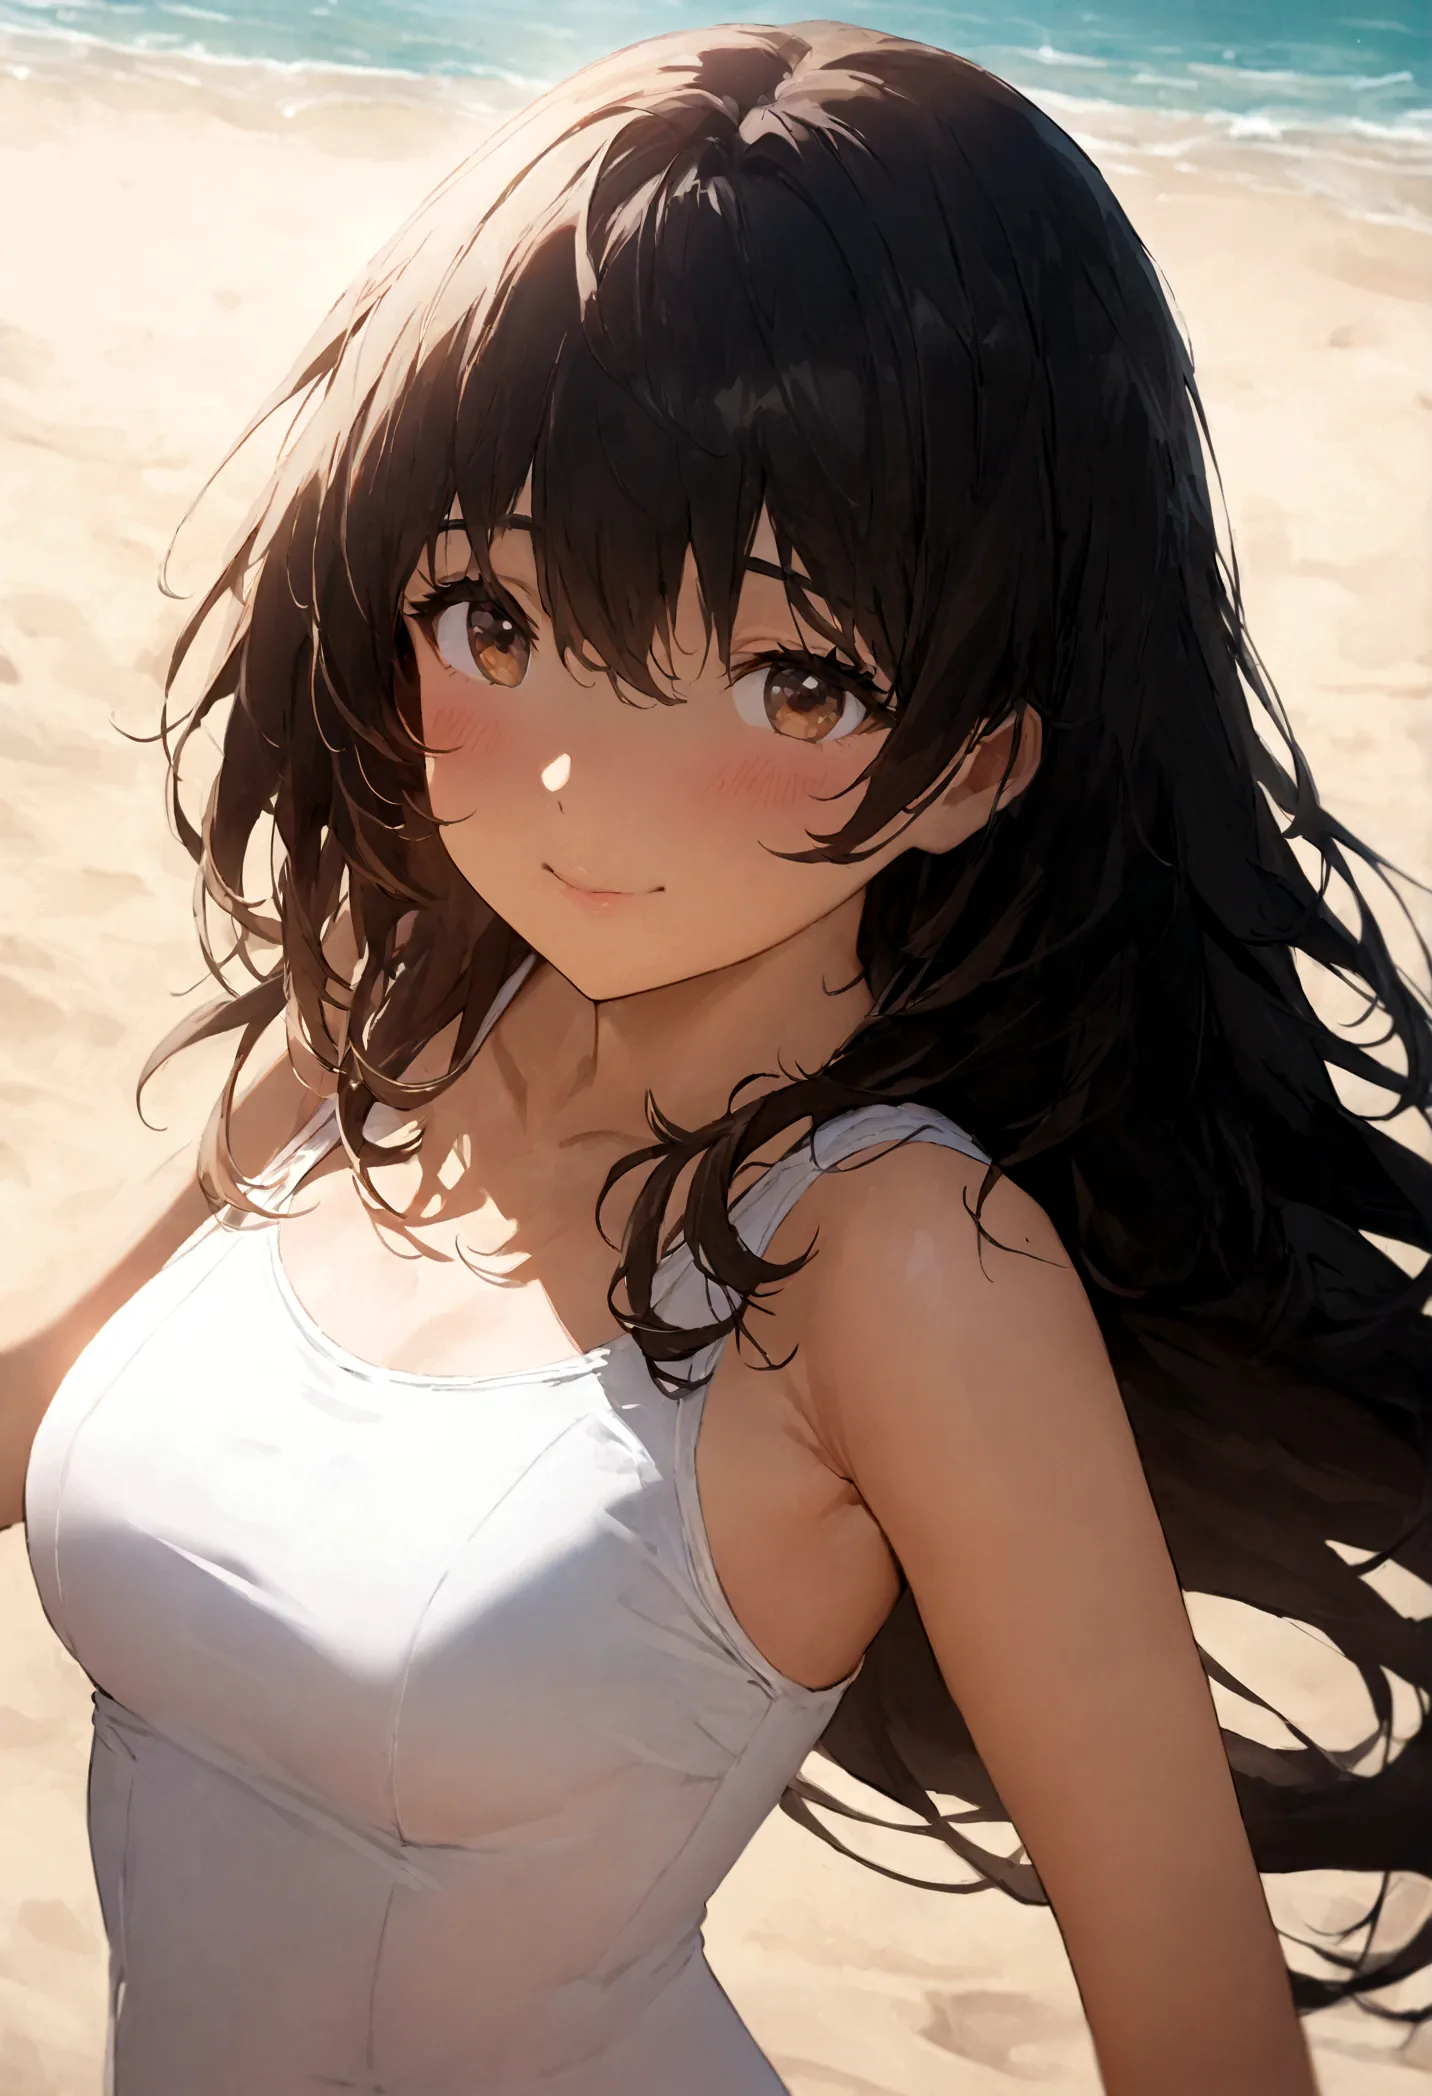 (master quality)(Anime style)(RAW Photos)High detail, Super detailed, Ultra HD Beautiful girl with short black hair having fun on an open beach, Surrounded by natural beauty, The warm sun shining down on her, Sway gently in the breeze, Creates a playful at...